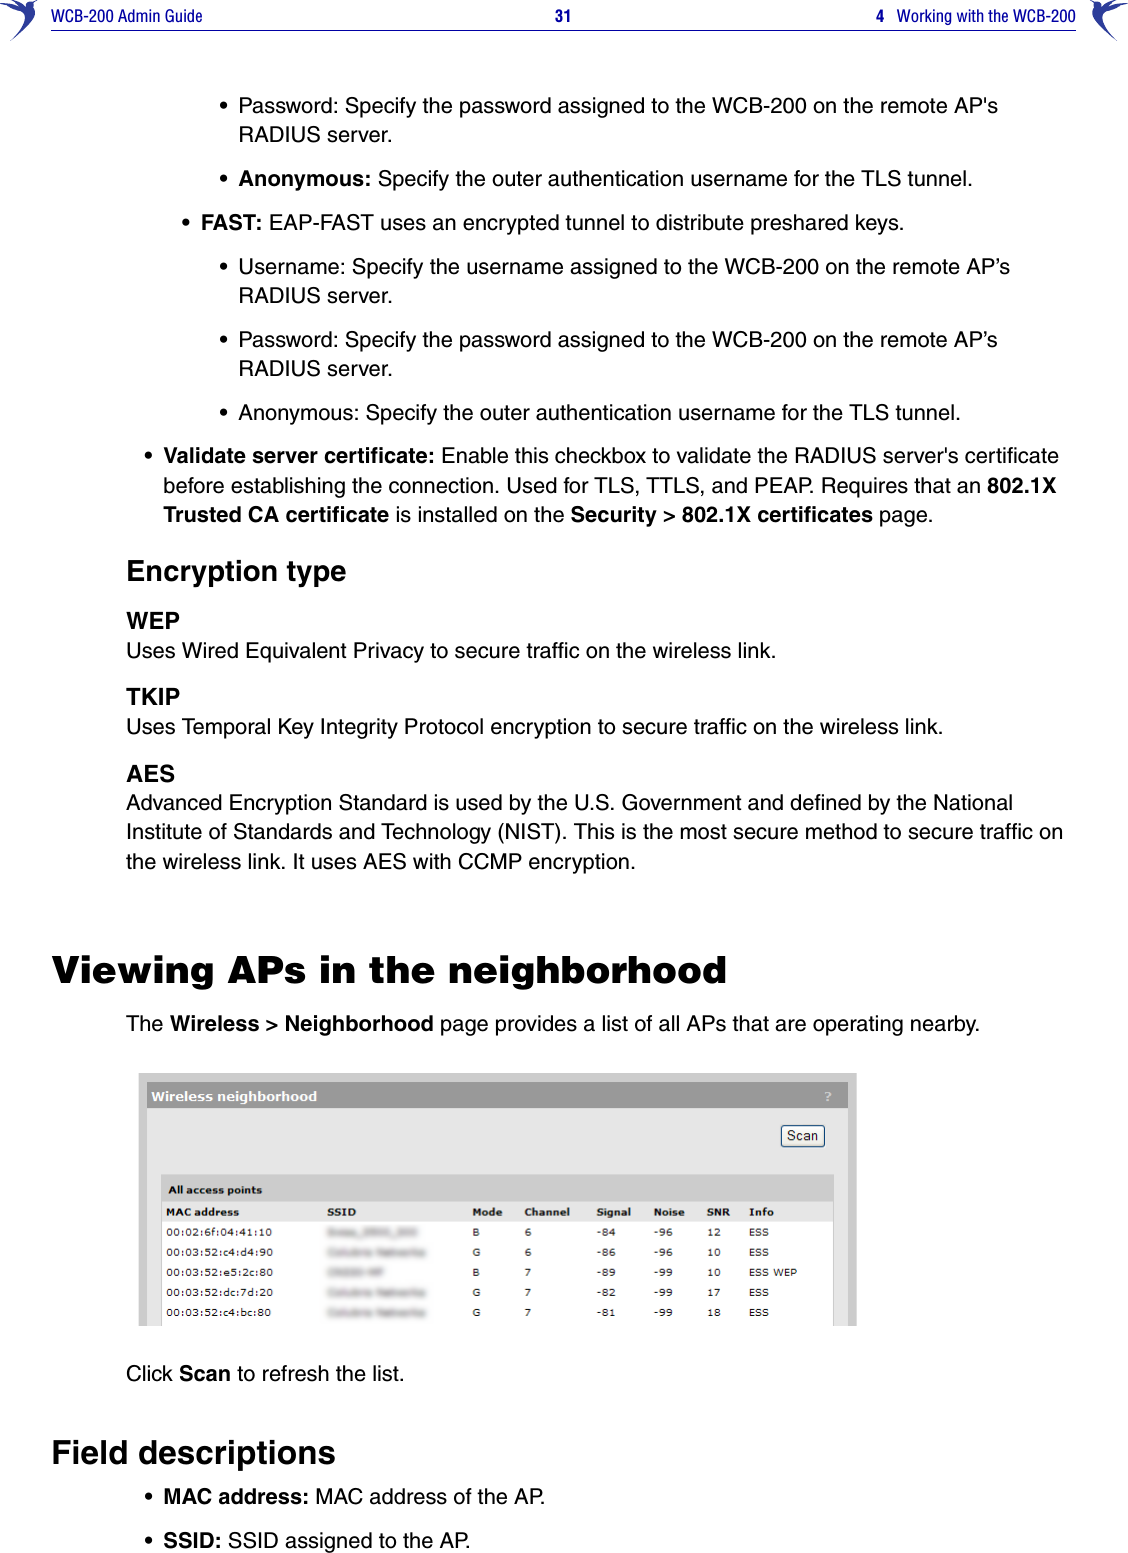 WCB-200 Admin Guide 31 4   Working with the WCB-200•Password: Specify the password assigned to the WCB-200 on the remote AP&apos;s RADIUS server. • Anonymous: Specify the outer authentication username for the TLS tunnel. •FAST: EAP-FAST uses an encrypted tunnel to distribute preshared keys. •Username: Specify the username assigned to the WCB-200 on the remote AP’s RADIUS server.•Password: Specify the password assigned to the WCB-200 on the remote AP’s RADIUS server.•Anonymous: Specify the outer authentication username for the TLS tunnel.• Validate server certificate: Enable this checkbox to validate the RADIUS server&apos;s certificate before establishing the connection. Used for TLS, TTLS, and PEAP. Requires that an 802.1X Trusted CA certificate is installed on the Security &gt; 802.1X certificates page. Encryption typeWEP Uses Wired Equivalent Privacy to secure traffic on the wireless link. TKIP Uses Temporal Key Integrity Protocol encryption to secure traffic on the wireless link. AES Advanced Encryption Standard is used by the U.S. Government and defined by the National Institute of Standards and Technology (NIST). This is the most secure method to secure traffic on the wireless link. It uses AES with CCMP encryption. Viewing APs in the neighborhoodThe Wireless &gt; Neighborhood page provides a list of all APs that are operating nearby. Click Scan to refresh the list.Field descriptions• MAC address: MAC address of the AP.•SSID: SSID assigned to the AP.